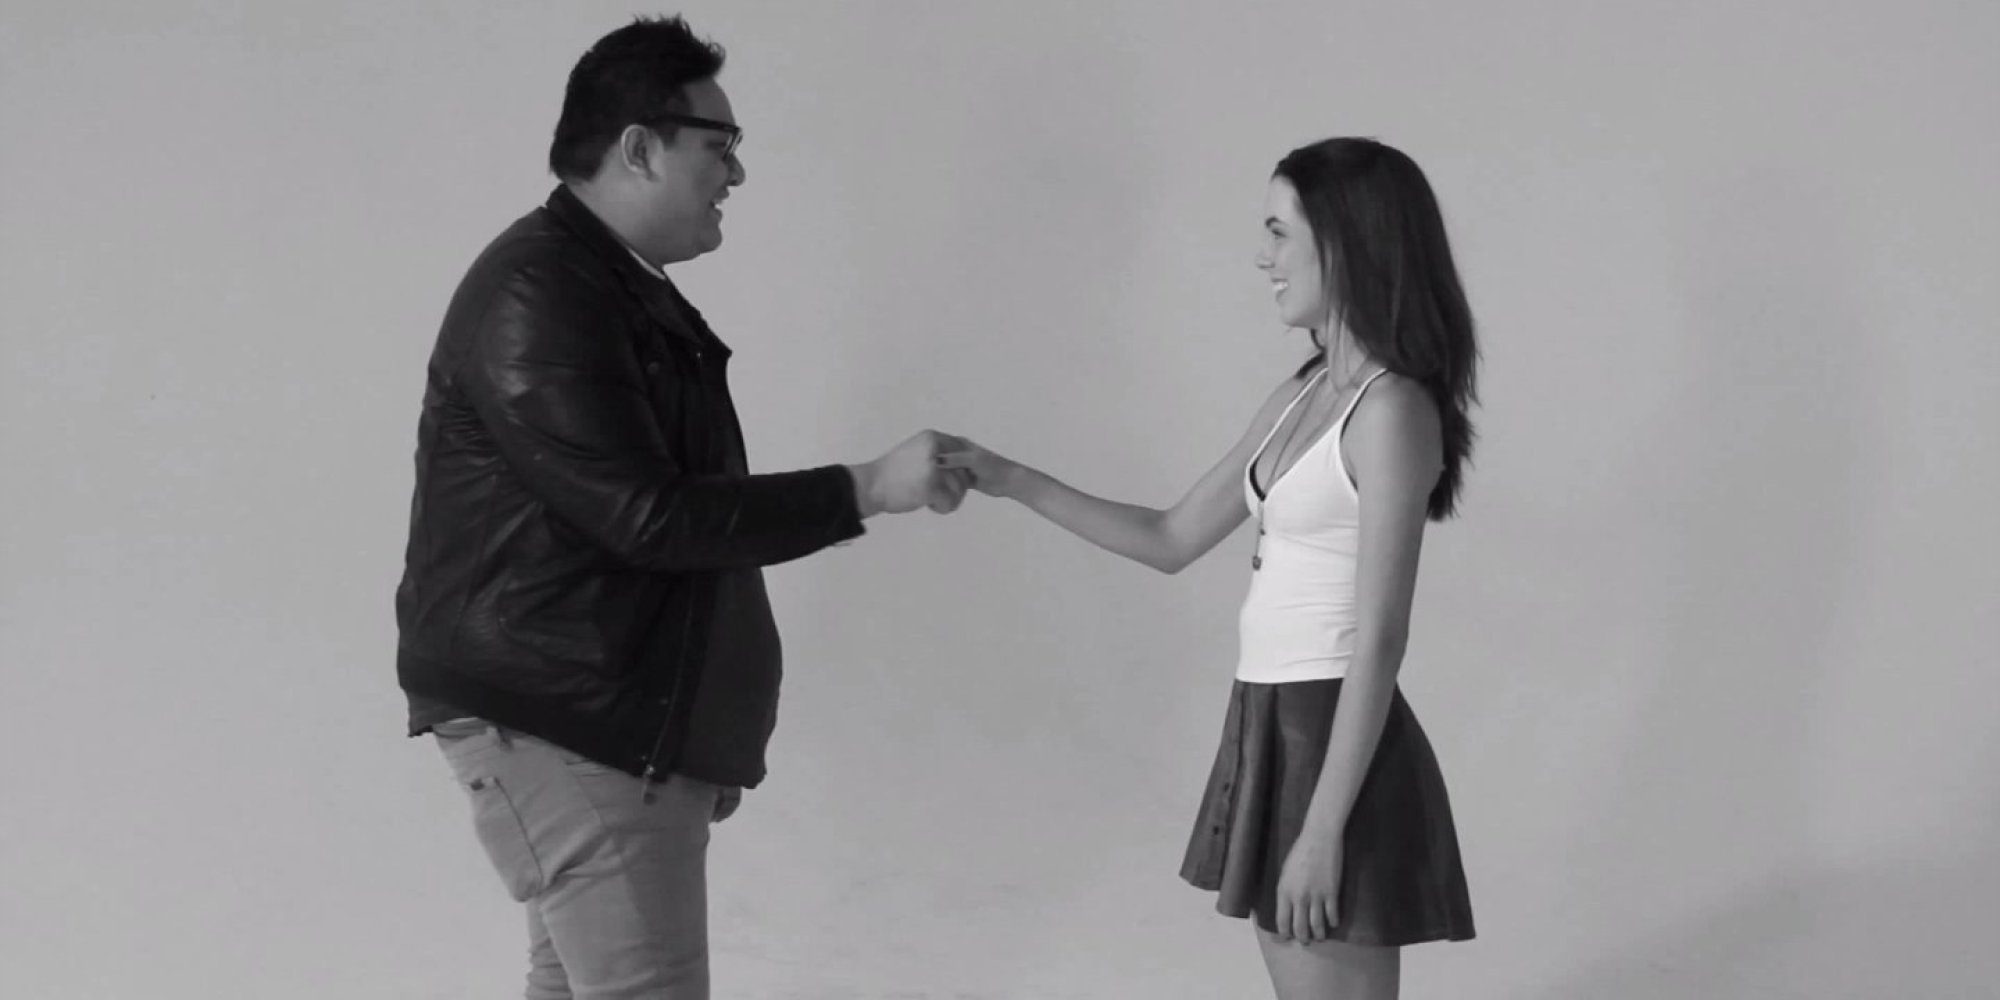 Watch What Happens When 20 People Are Paired Off And Asked To Slap Each